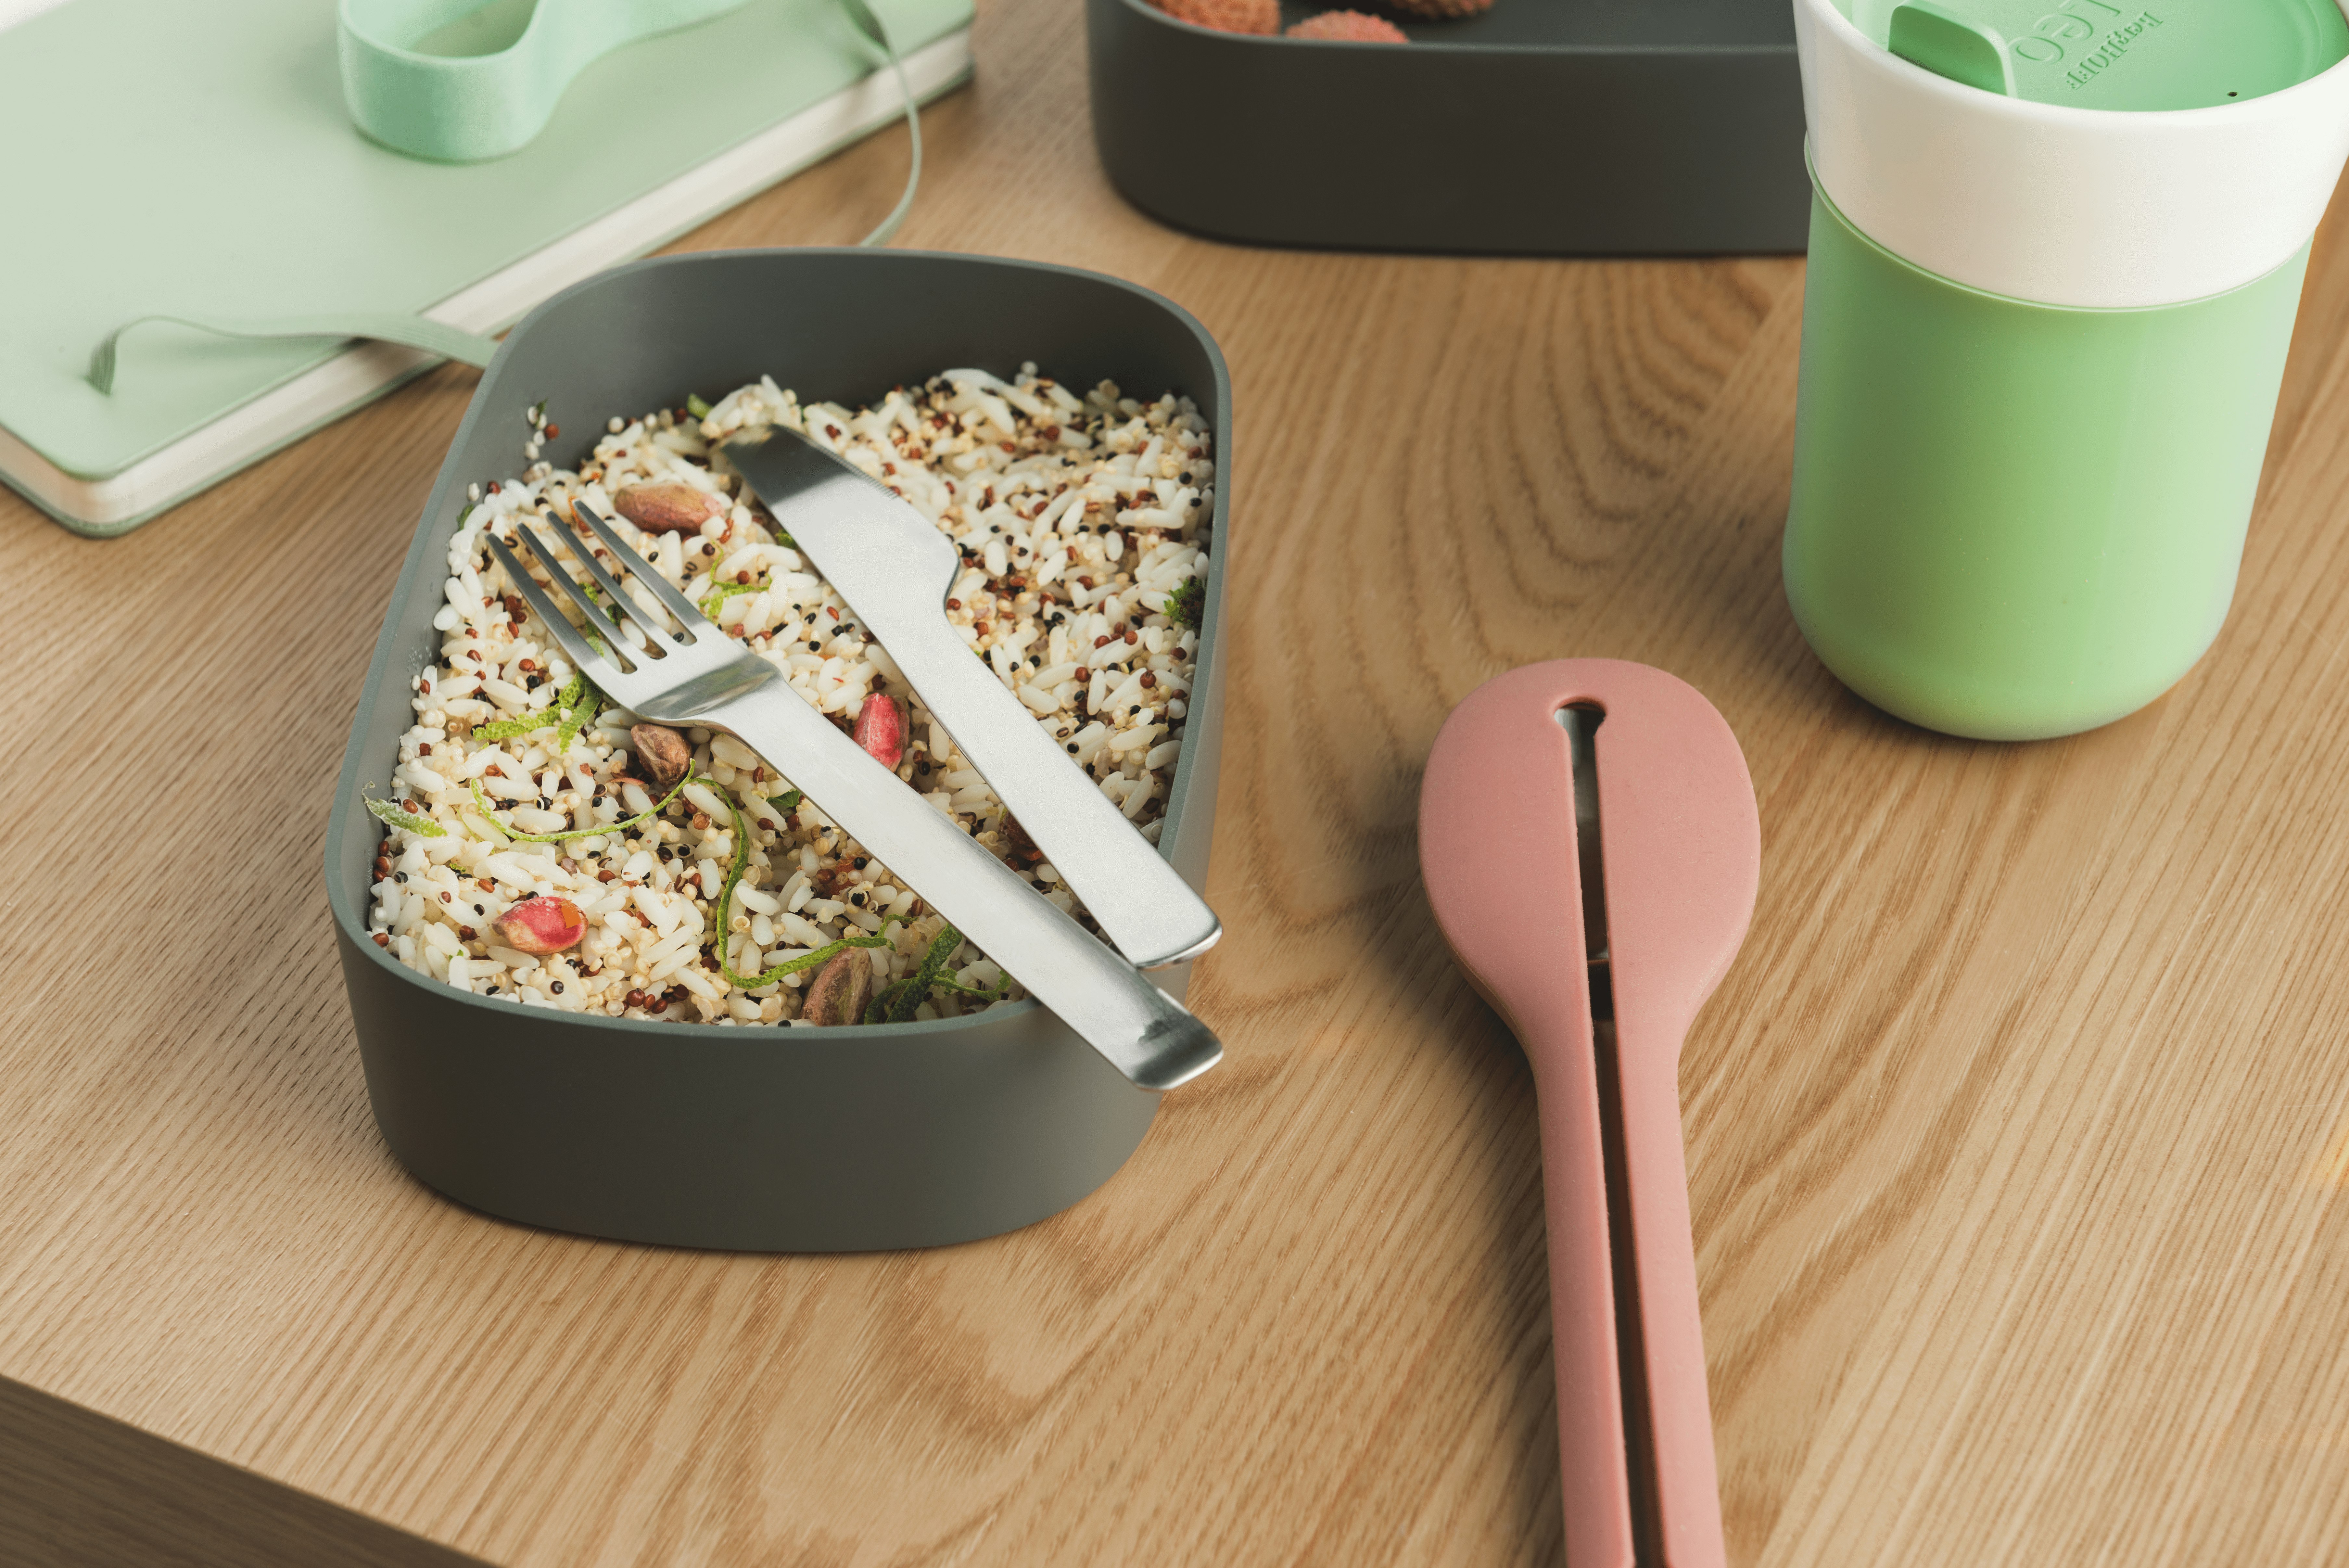 A reusable knife and fork set for eating a rice dish, with a carrying case nearby